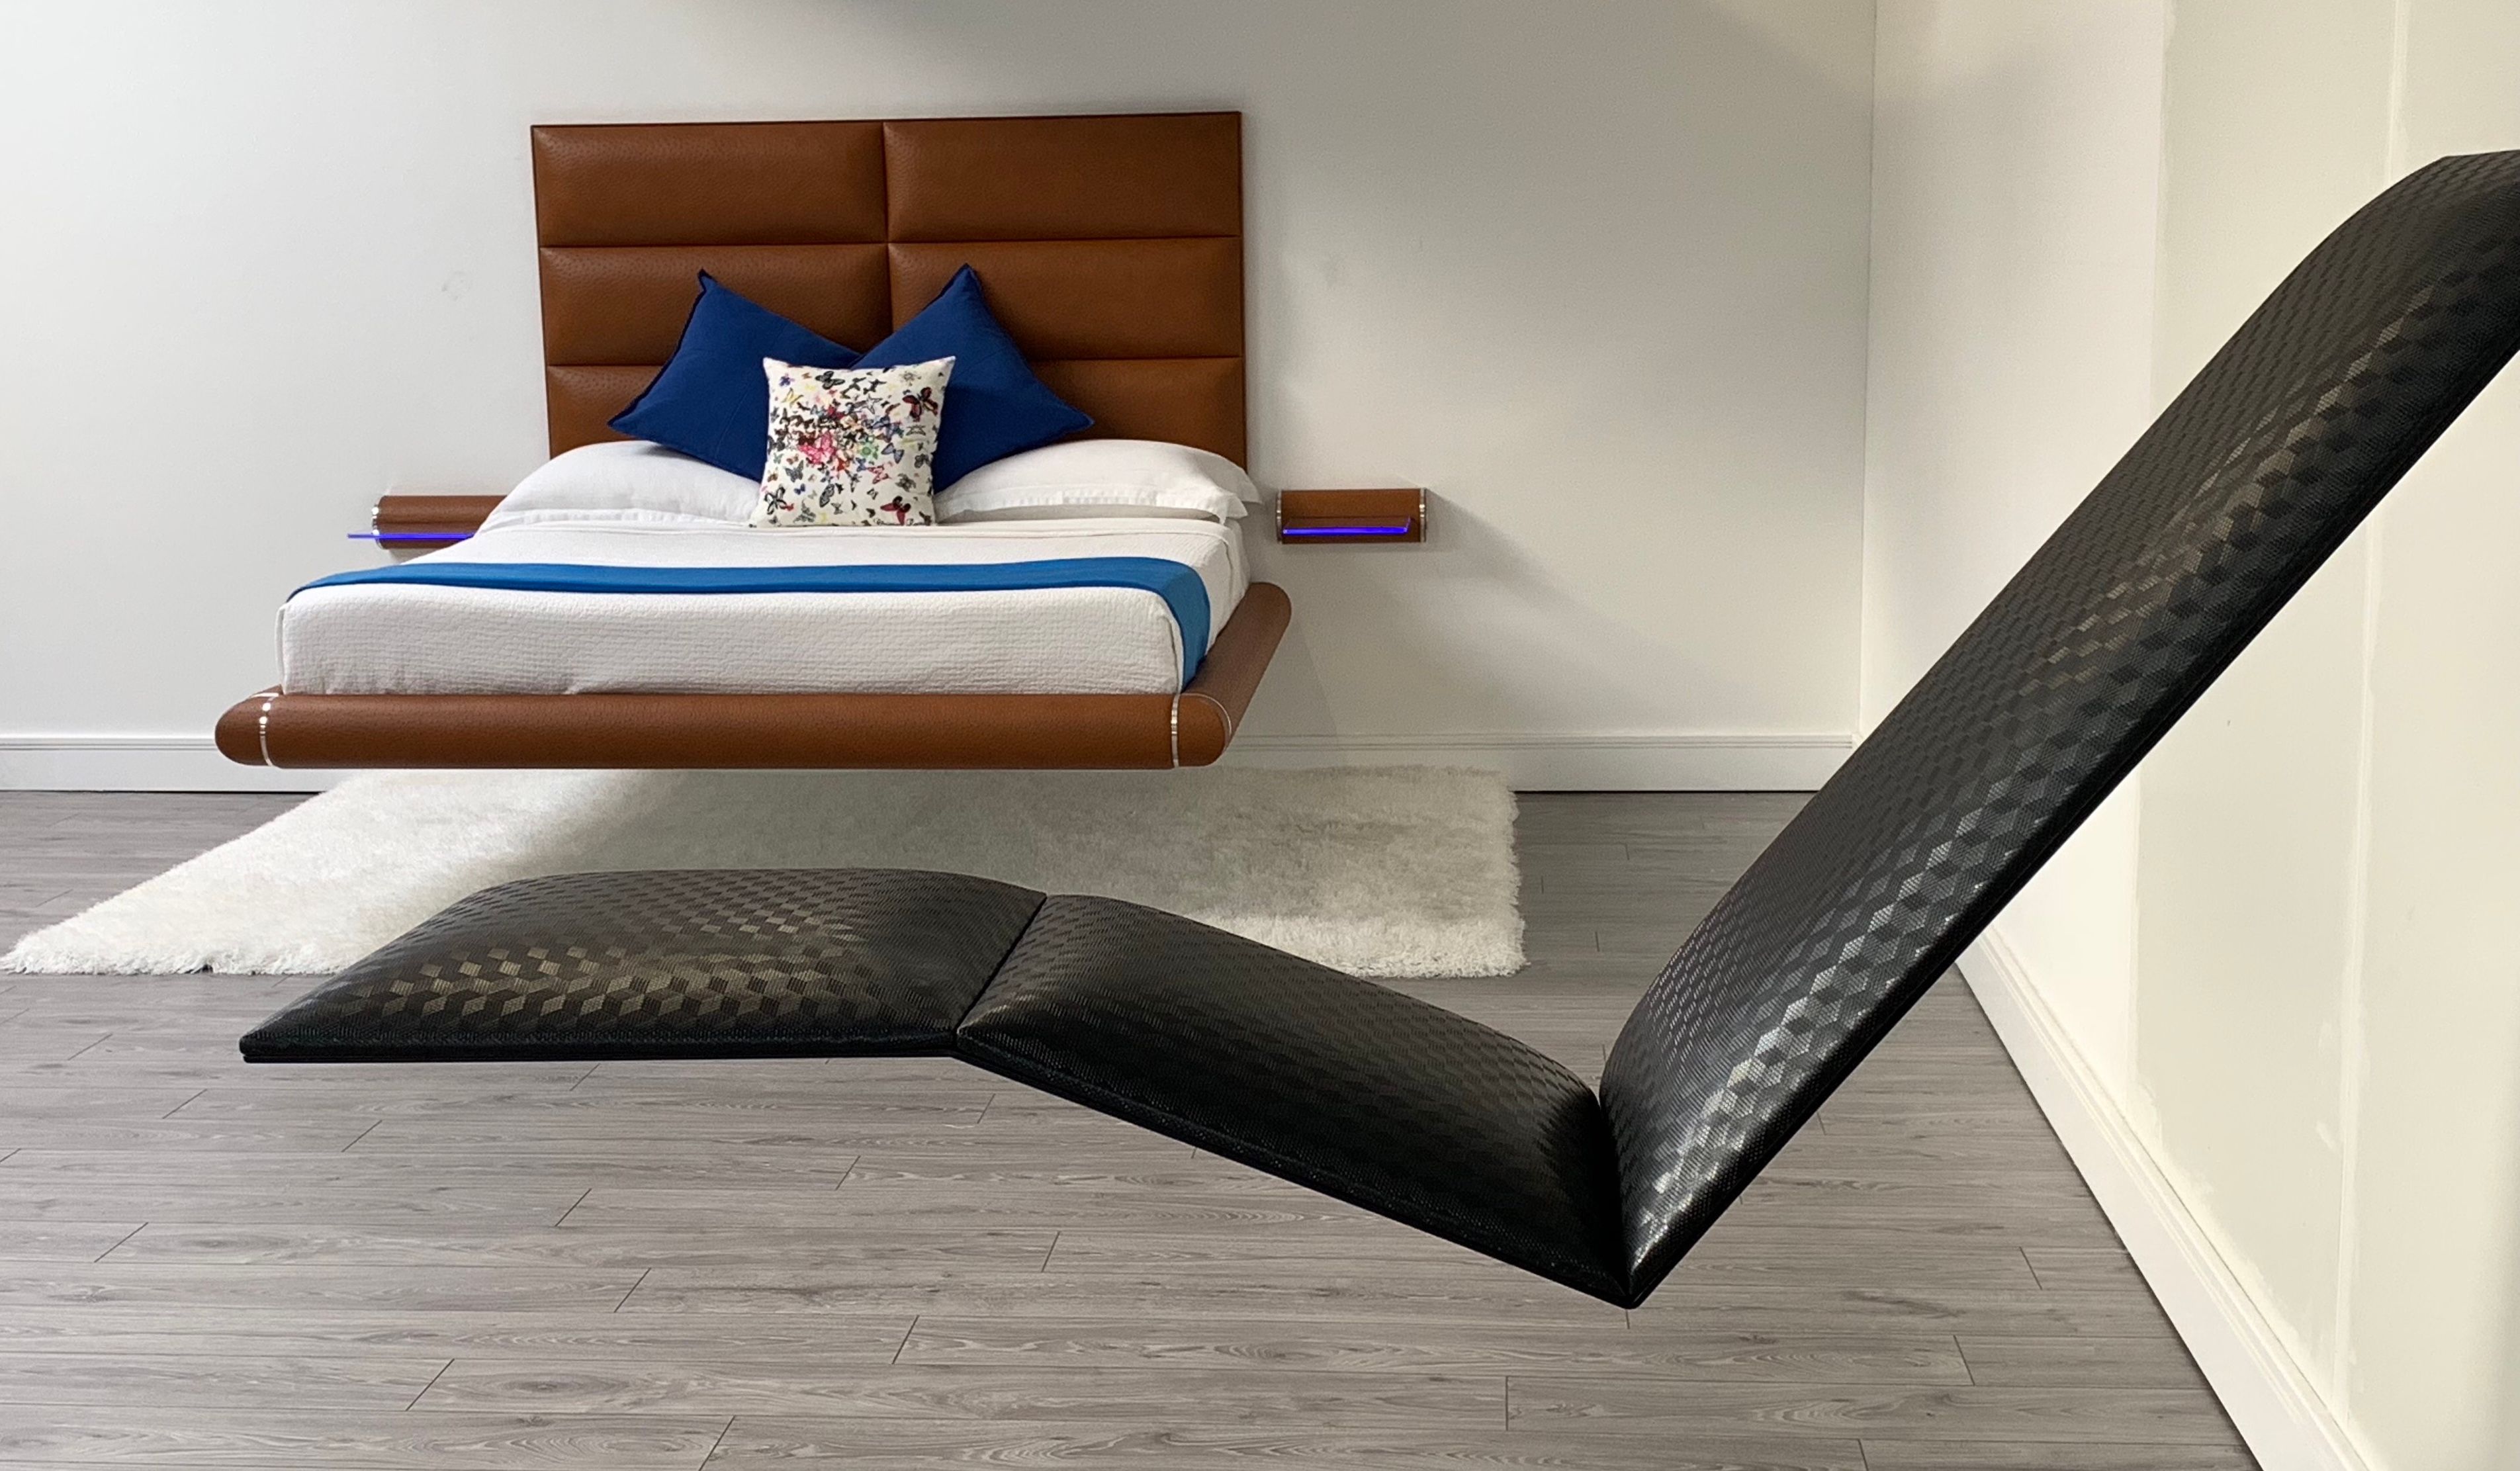 Floating Chaise Longue